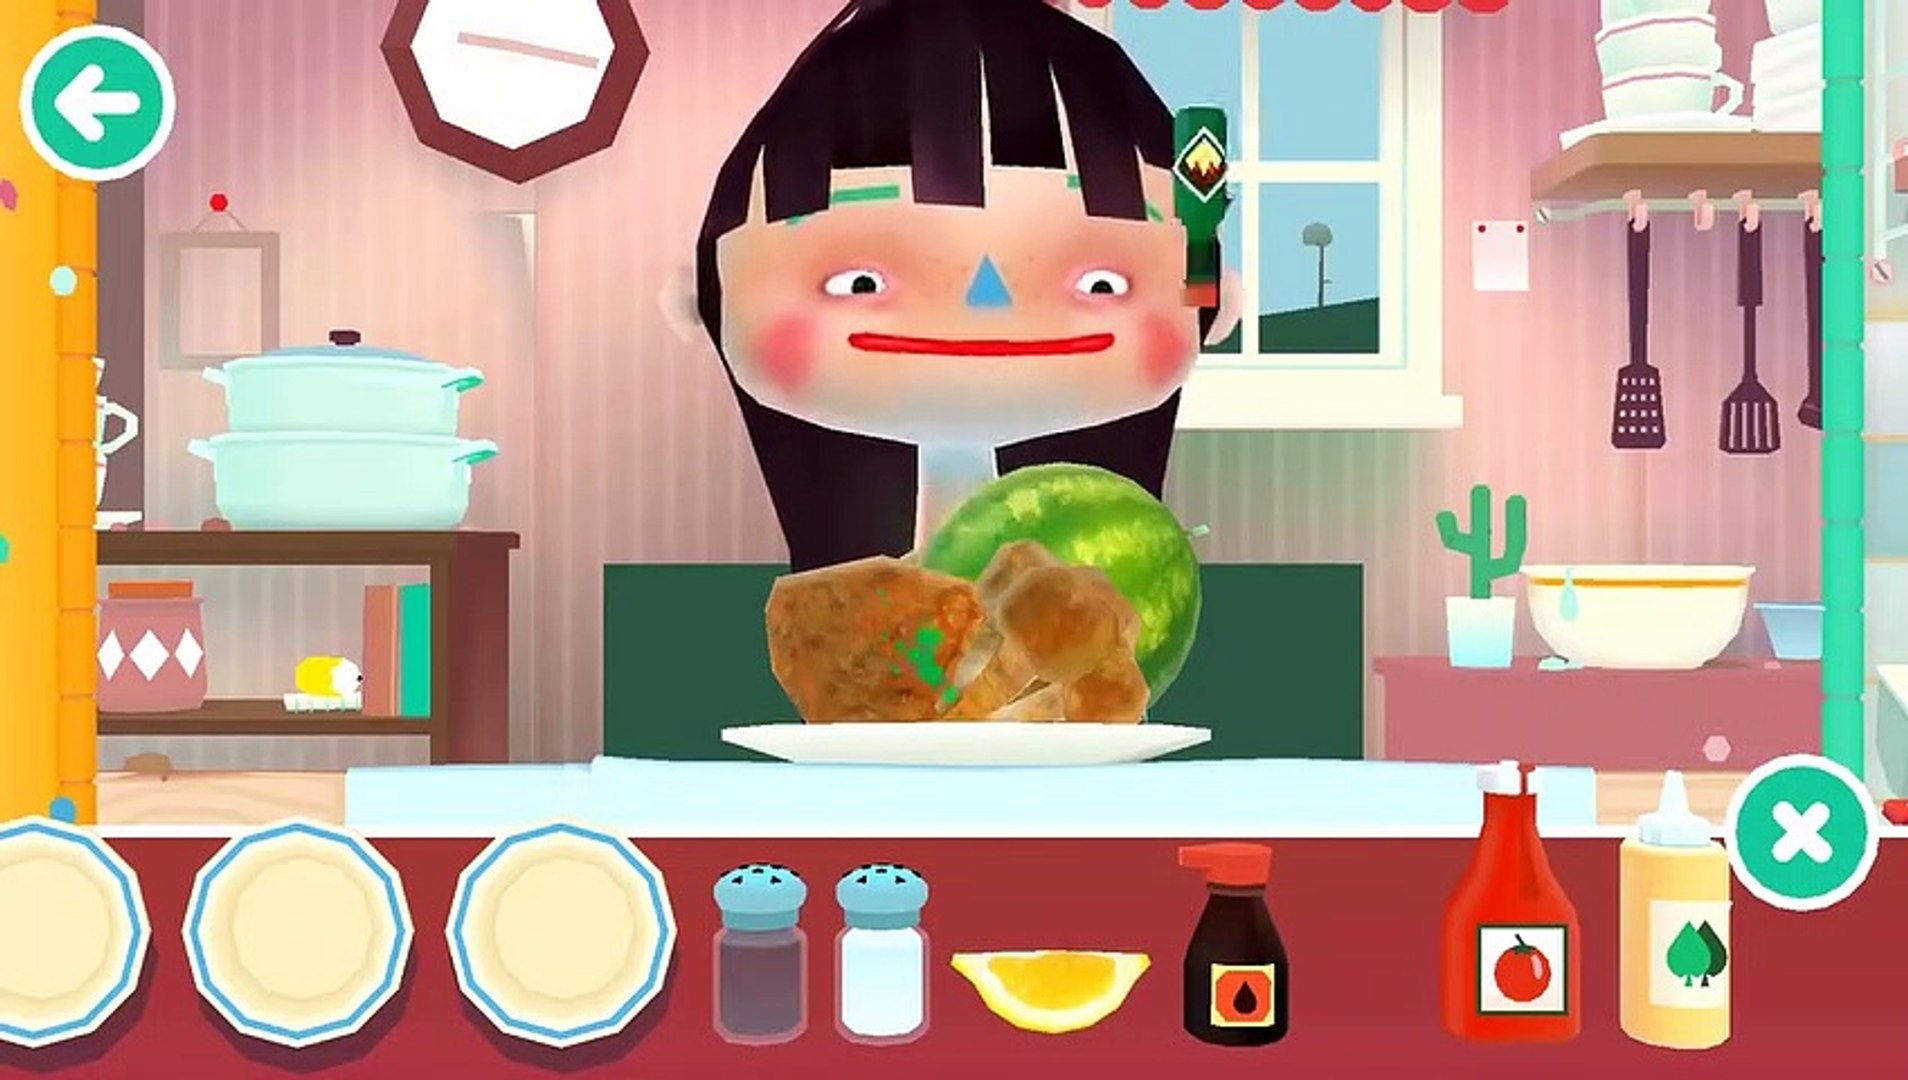 Play Toca Kitchen 2 Fun Kids Cooking Games Play Fun Learn Making Funny Foods Gameplay Video Dailymotion